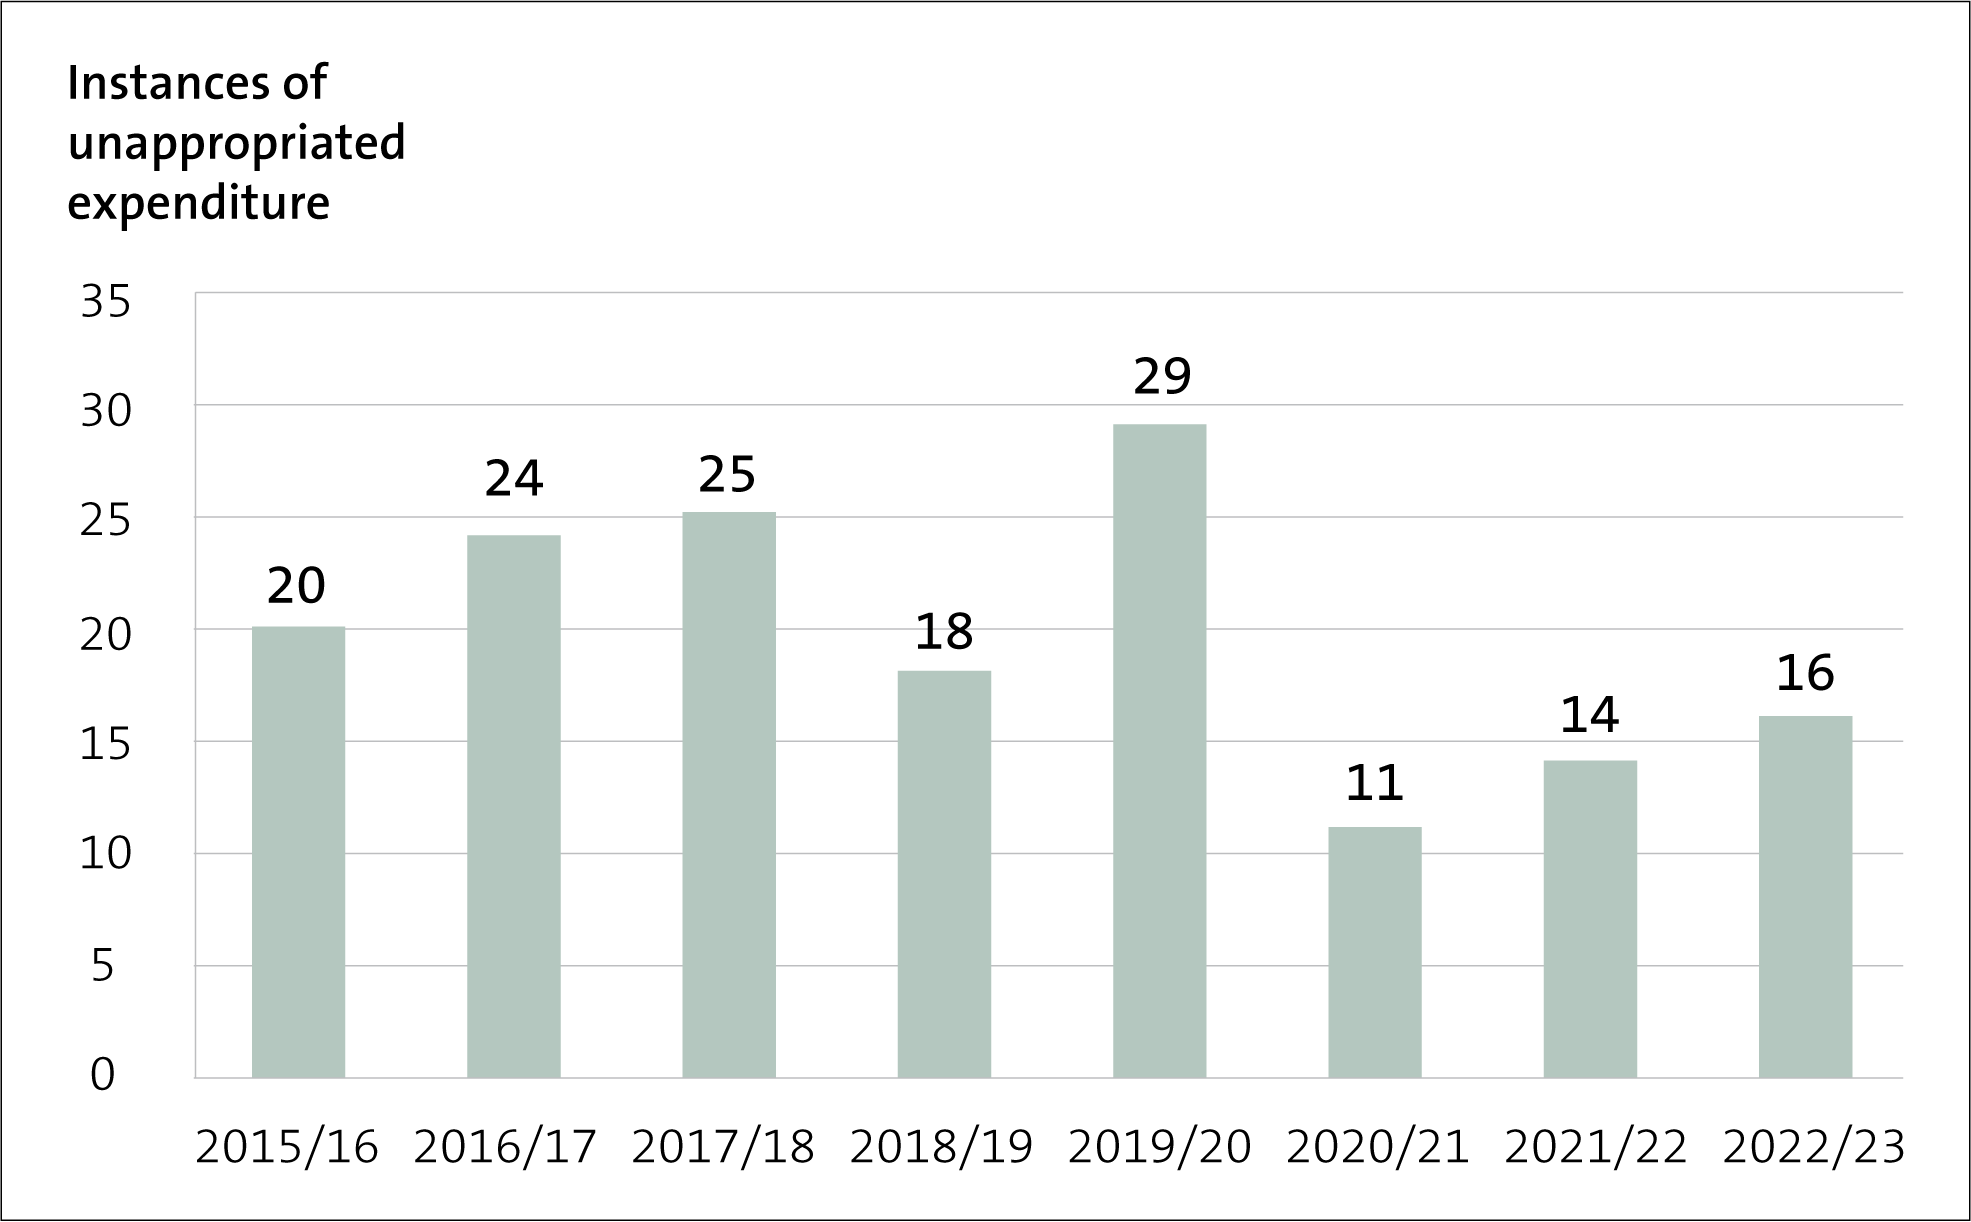 Figure 5 - Number of instances of unappropriated expenditure, from 2015/16 to 2022/23